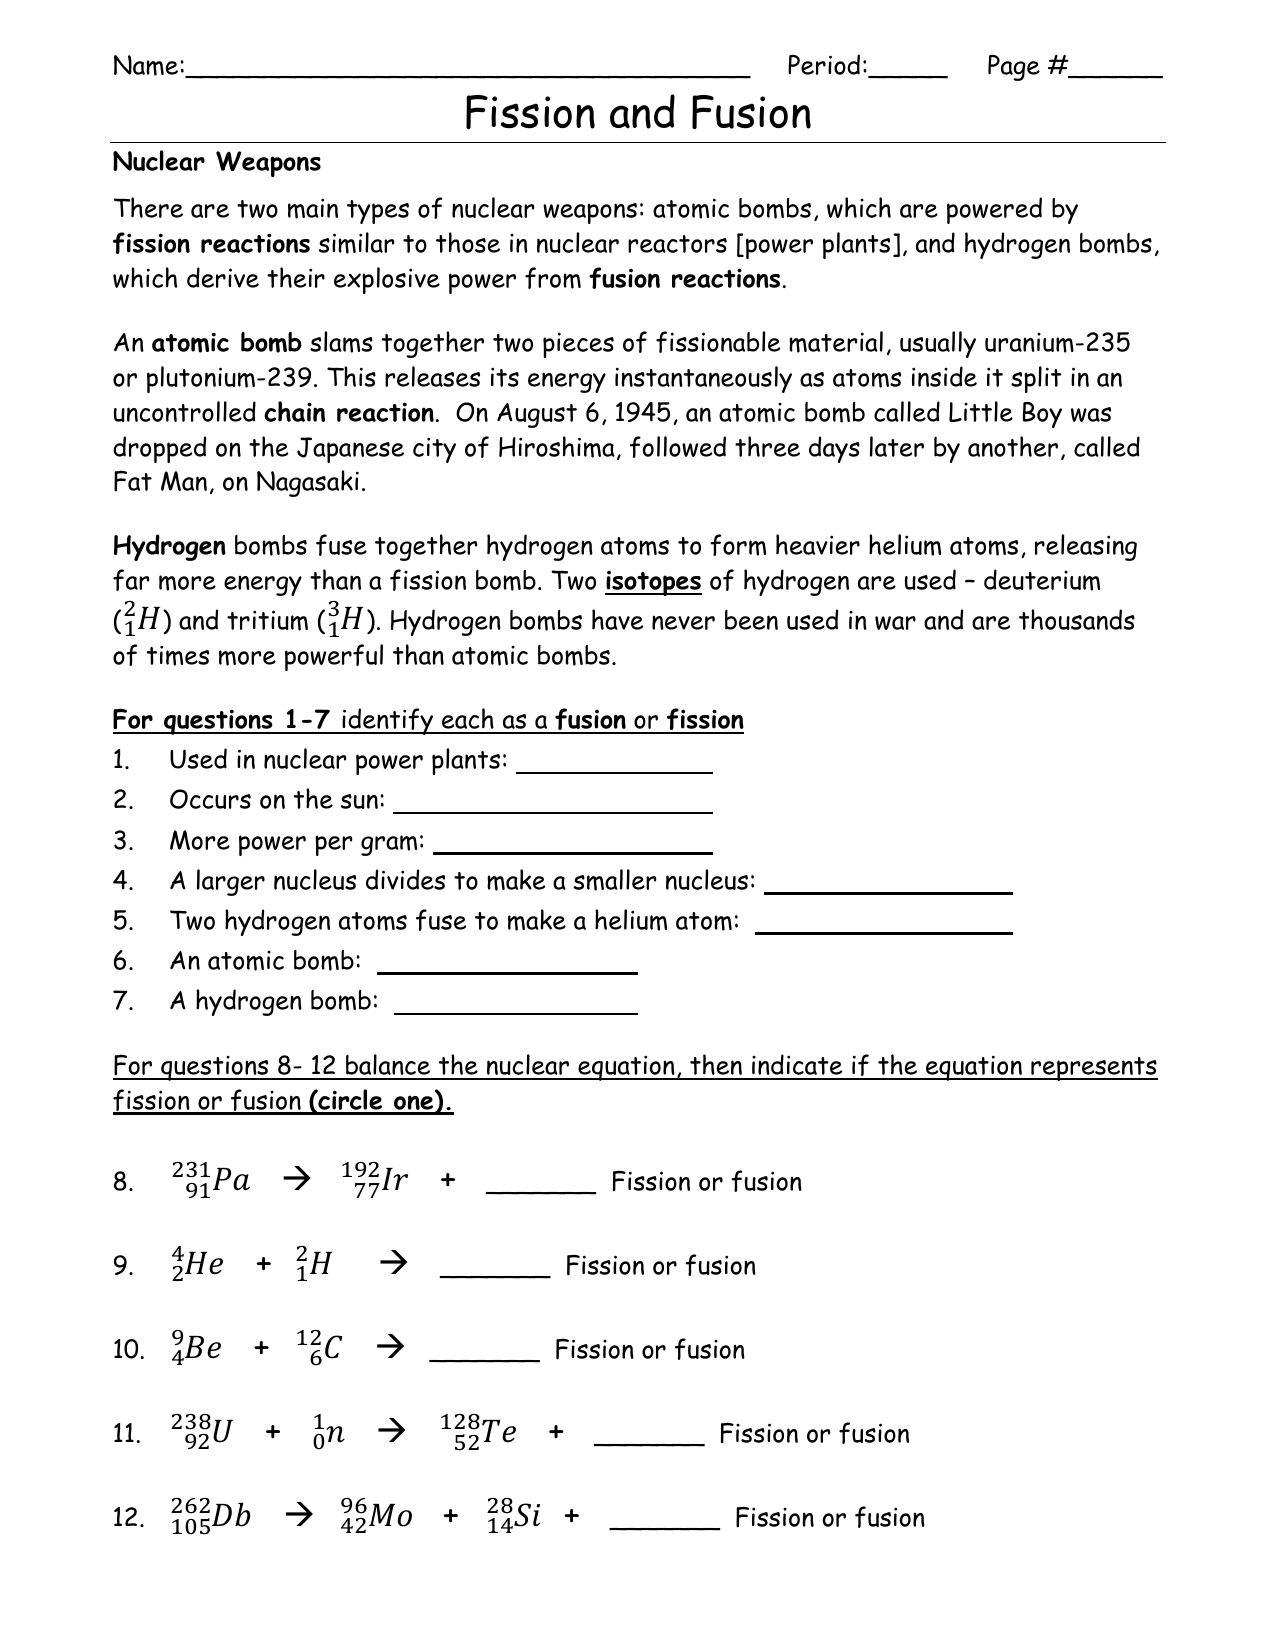 Fission vs Fusion Worksheet In Balancing Nuclear Equations Worksheet